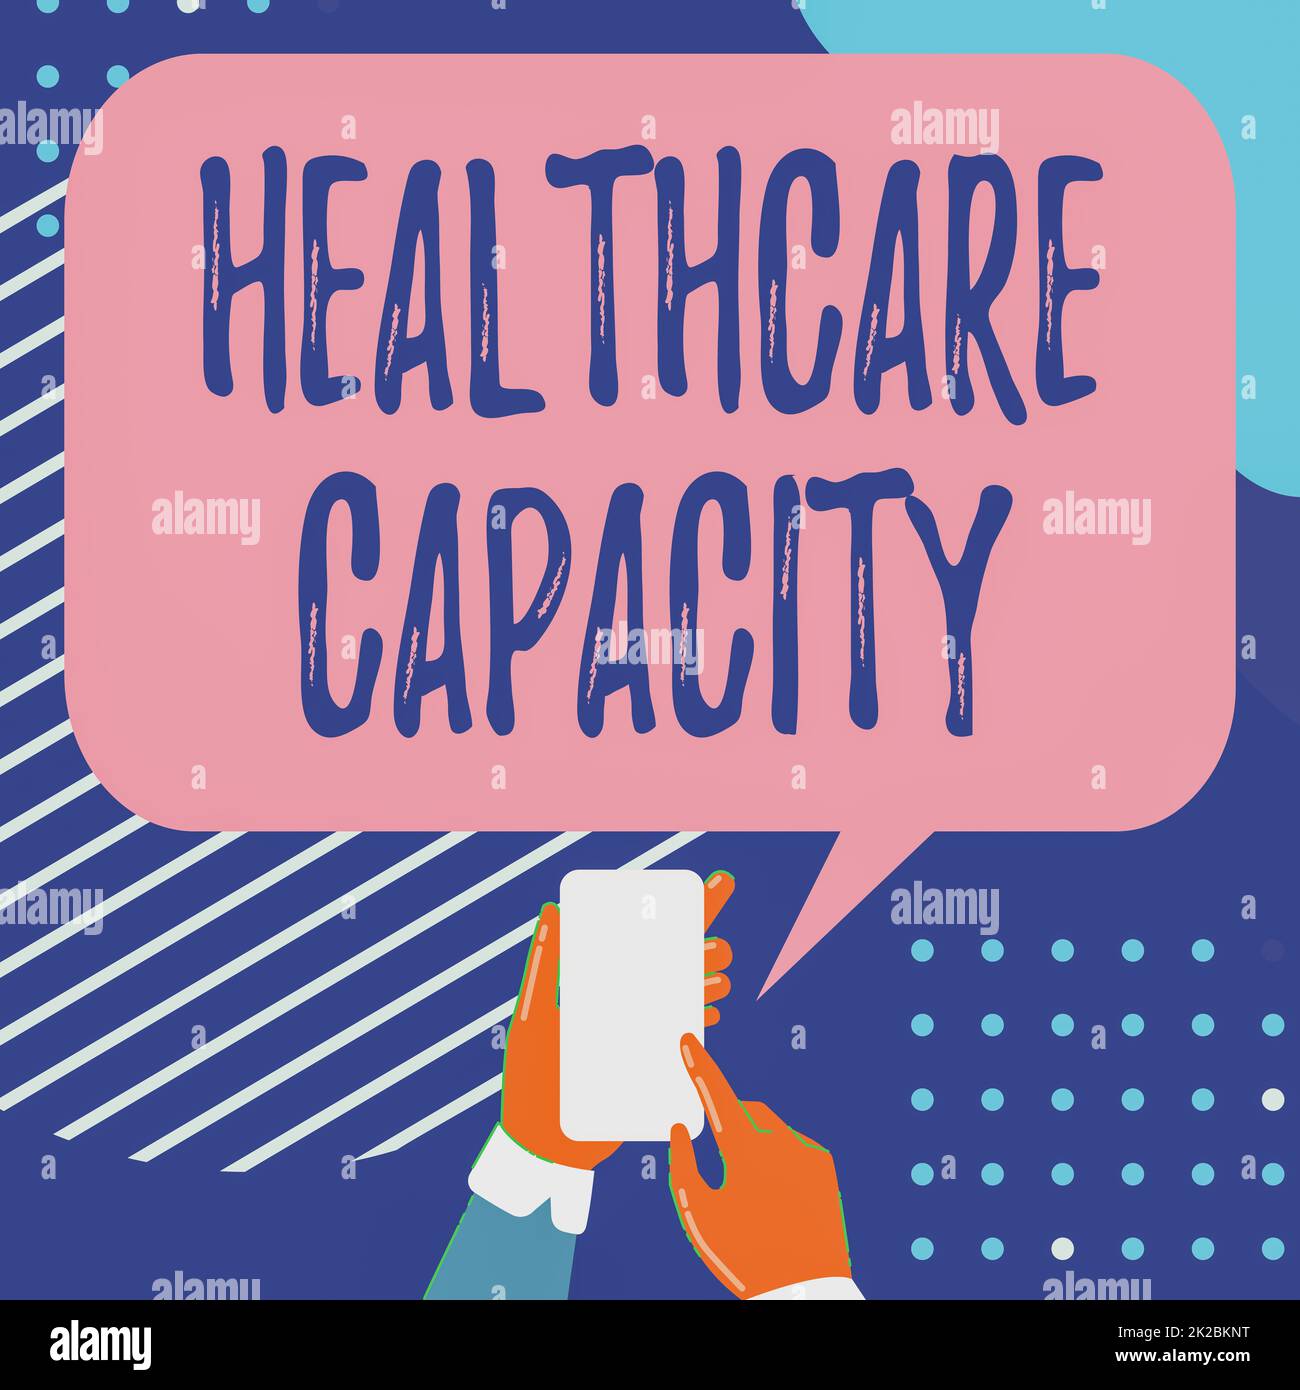 Sign displaying Healthcare Capacity, Business approach maximum amount of patients provided with the right medical service Mobile Drawing Sharing Posit Stock Photo